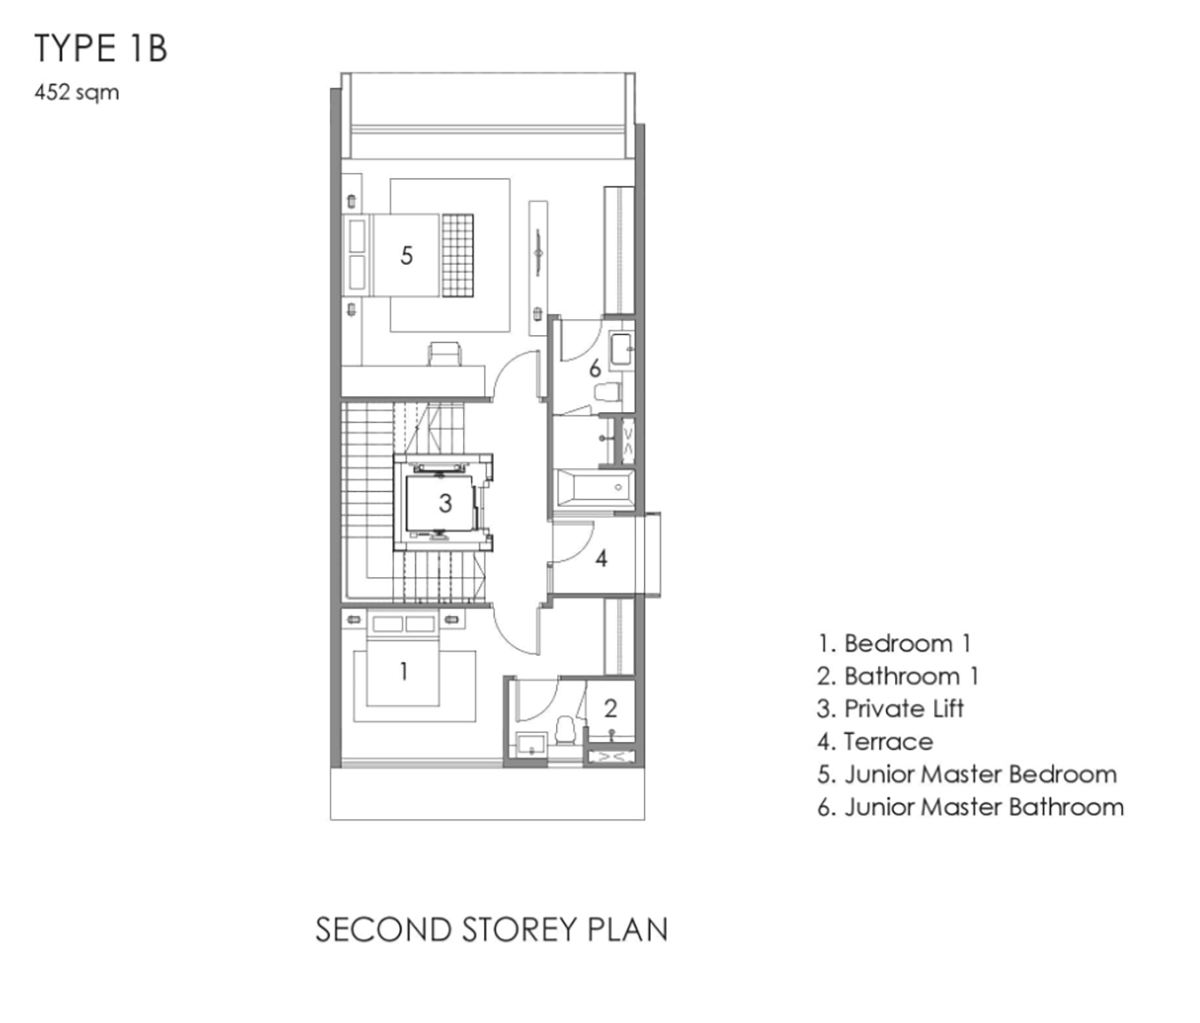 parkwood-collection-type-1b-floor-plan-second-storey.png